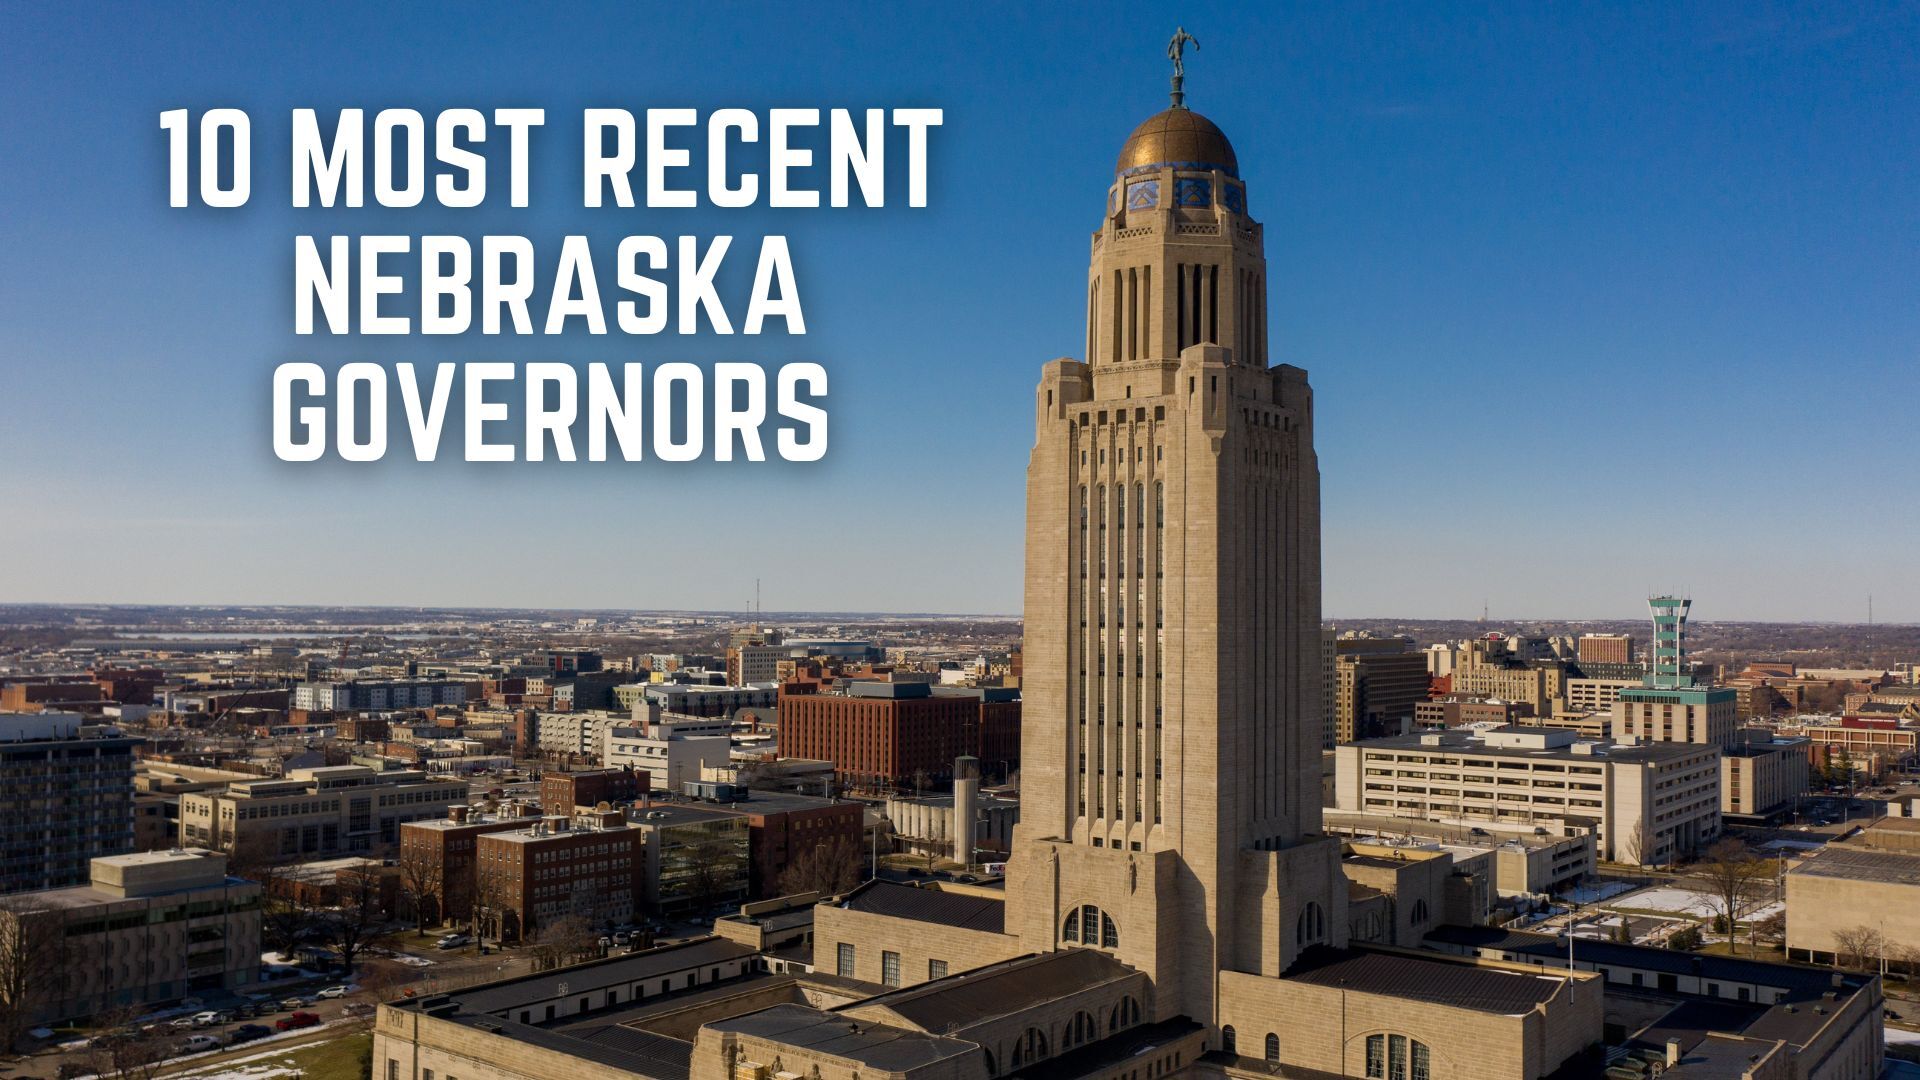 Bare was behind-the-scenes force in Nebraska government photo